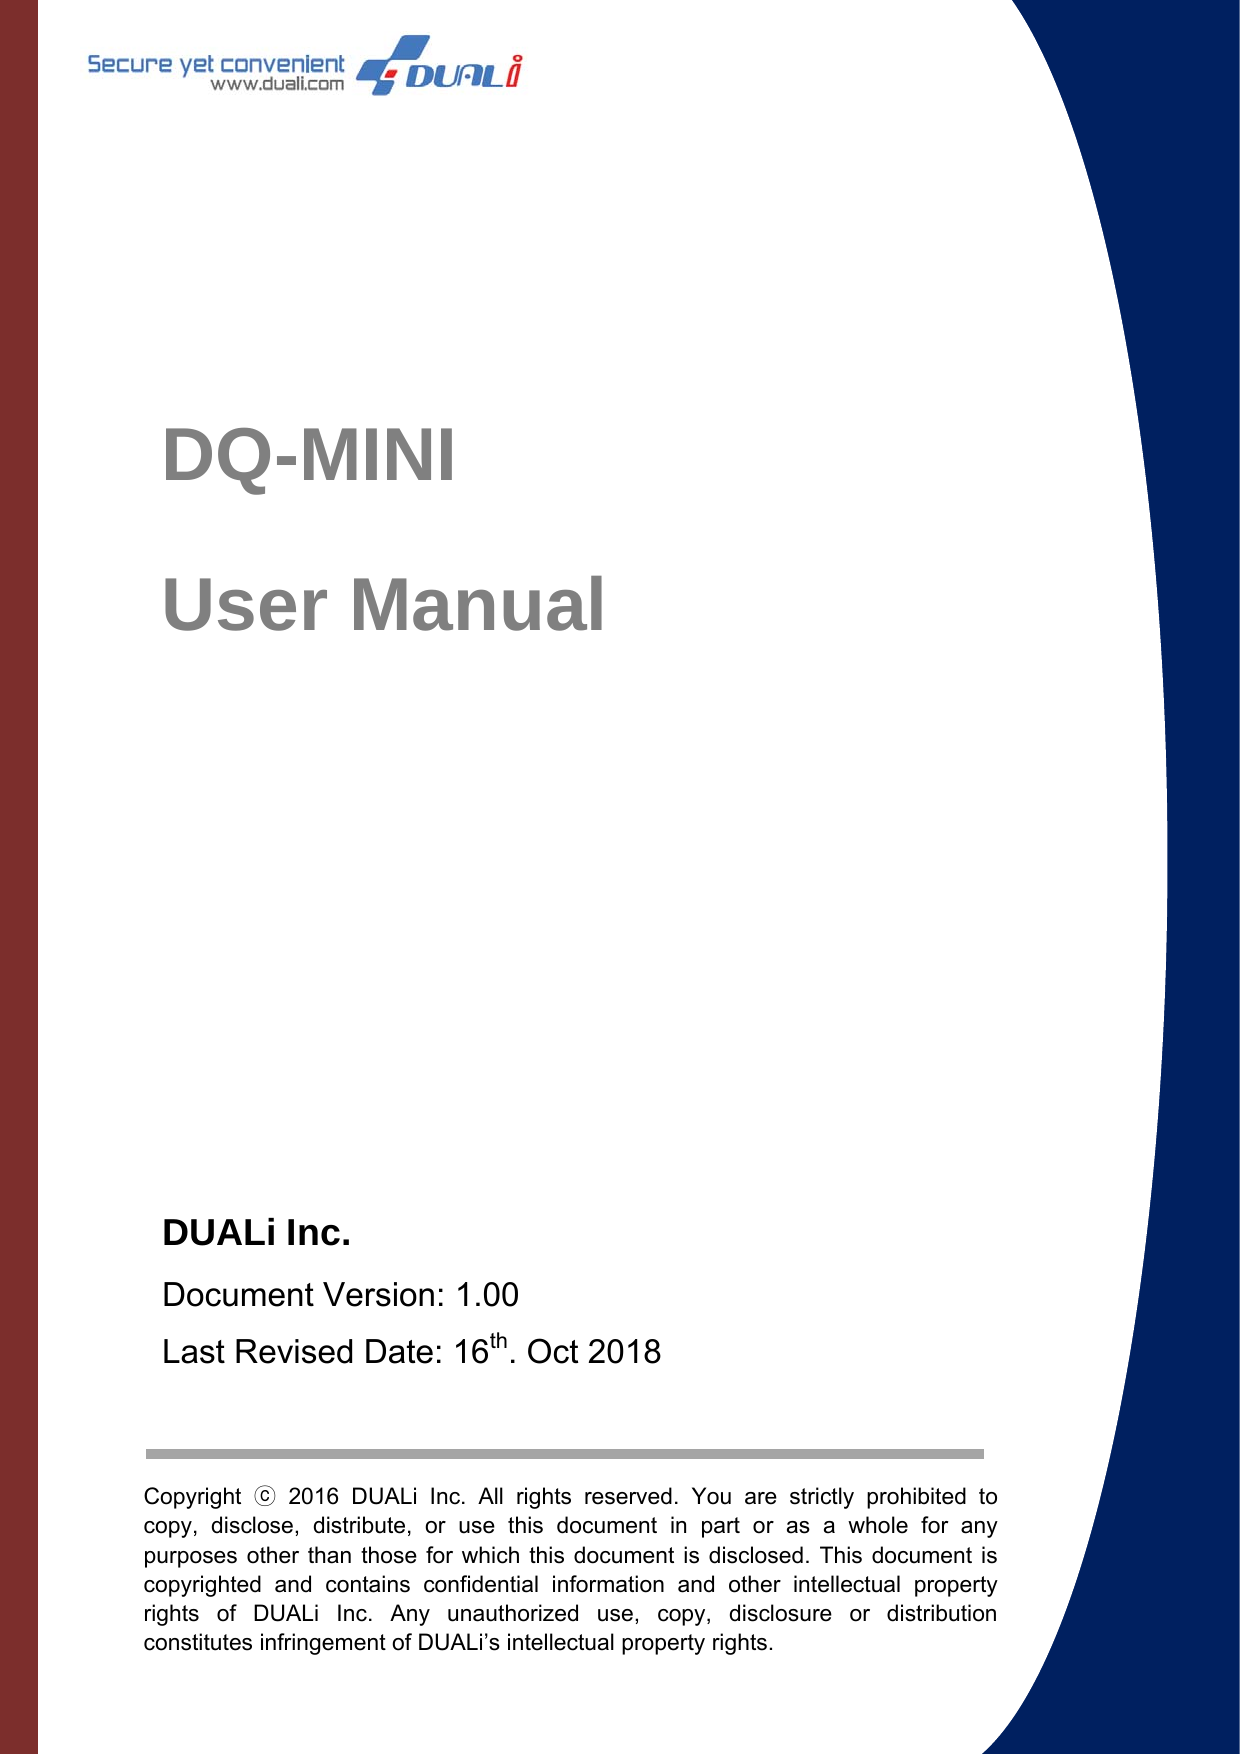                                DQ-MINI User Manual Copyright  ⓒ 2016 DUALi Inc. All rights reserved. You are strictly prohibited to copy, disclose, distribute, or use this document in part or as a whole for any purposes other than those for which this document is disclosed. This document is copyrighted and contains confidential information and other intellectual property rights of DUALi Inc. Any unauthorized use, copy, disclosure or distribution constitutes infringement of DUALi’s intellectual property rights.  DUALi Inc. Document Version: 1.00 Last Revised Date: 16th. Oct 2018 